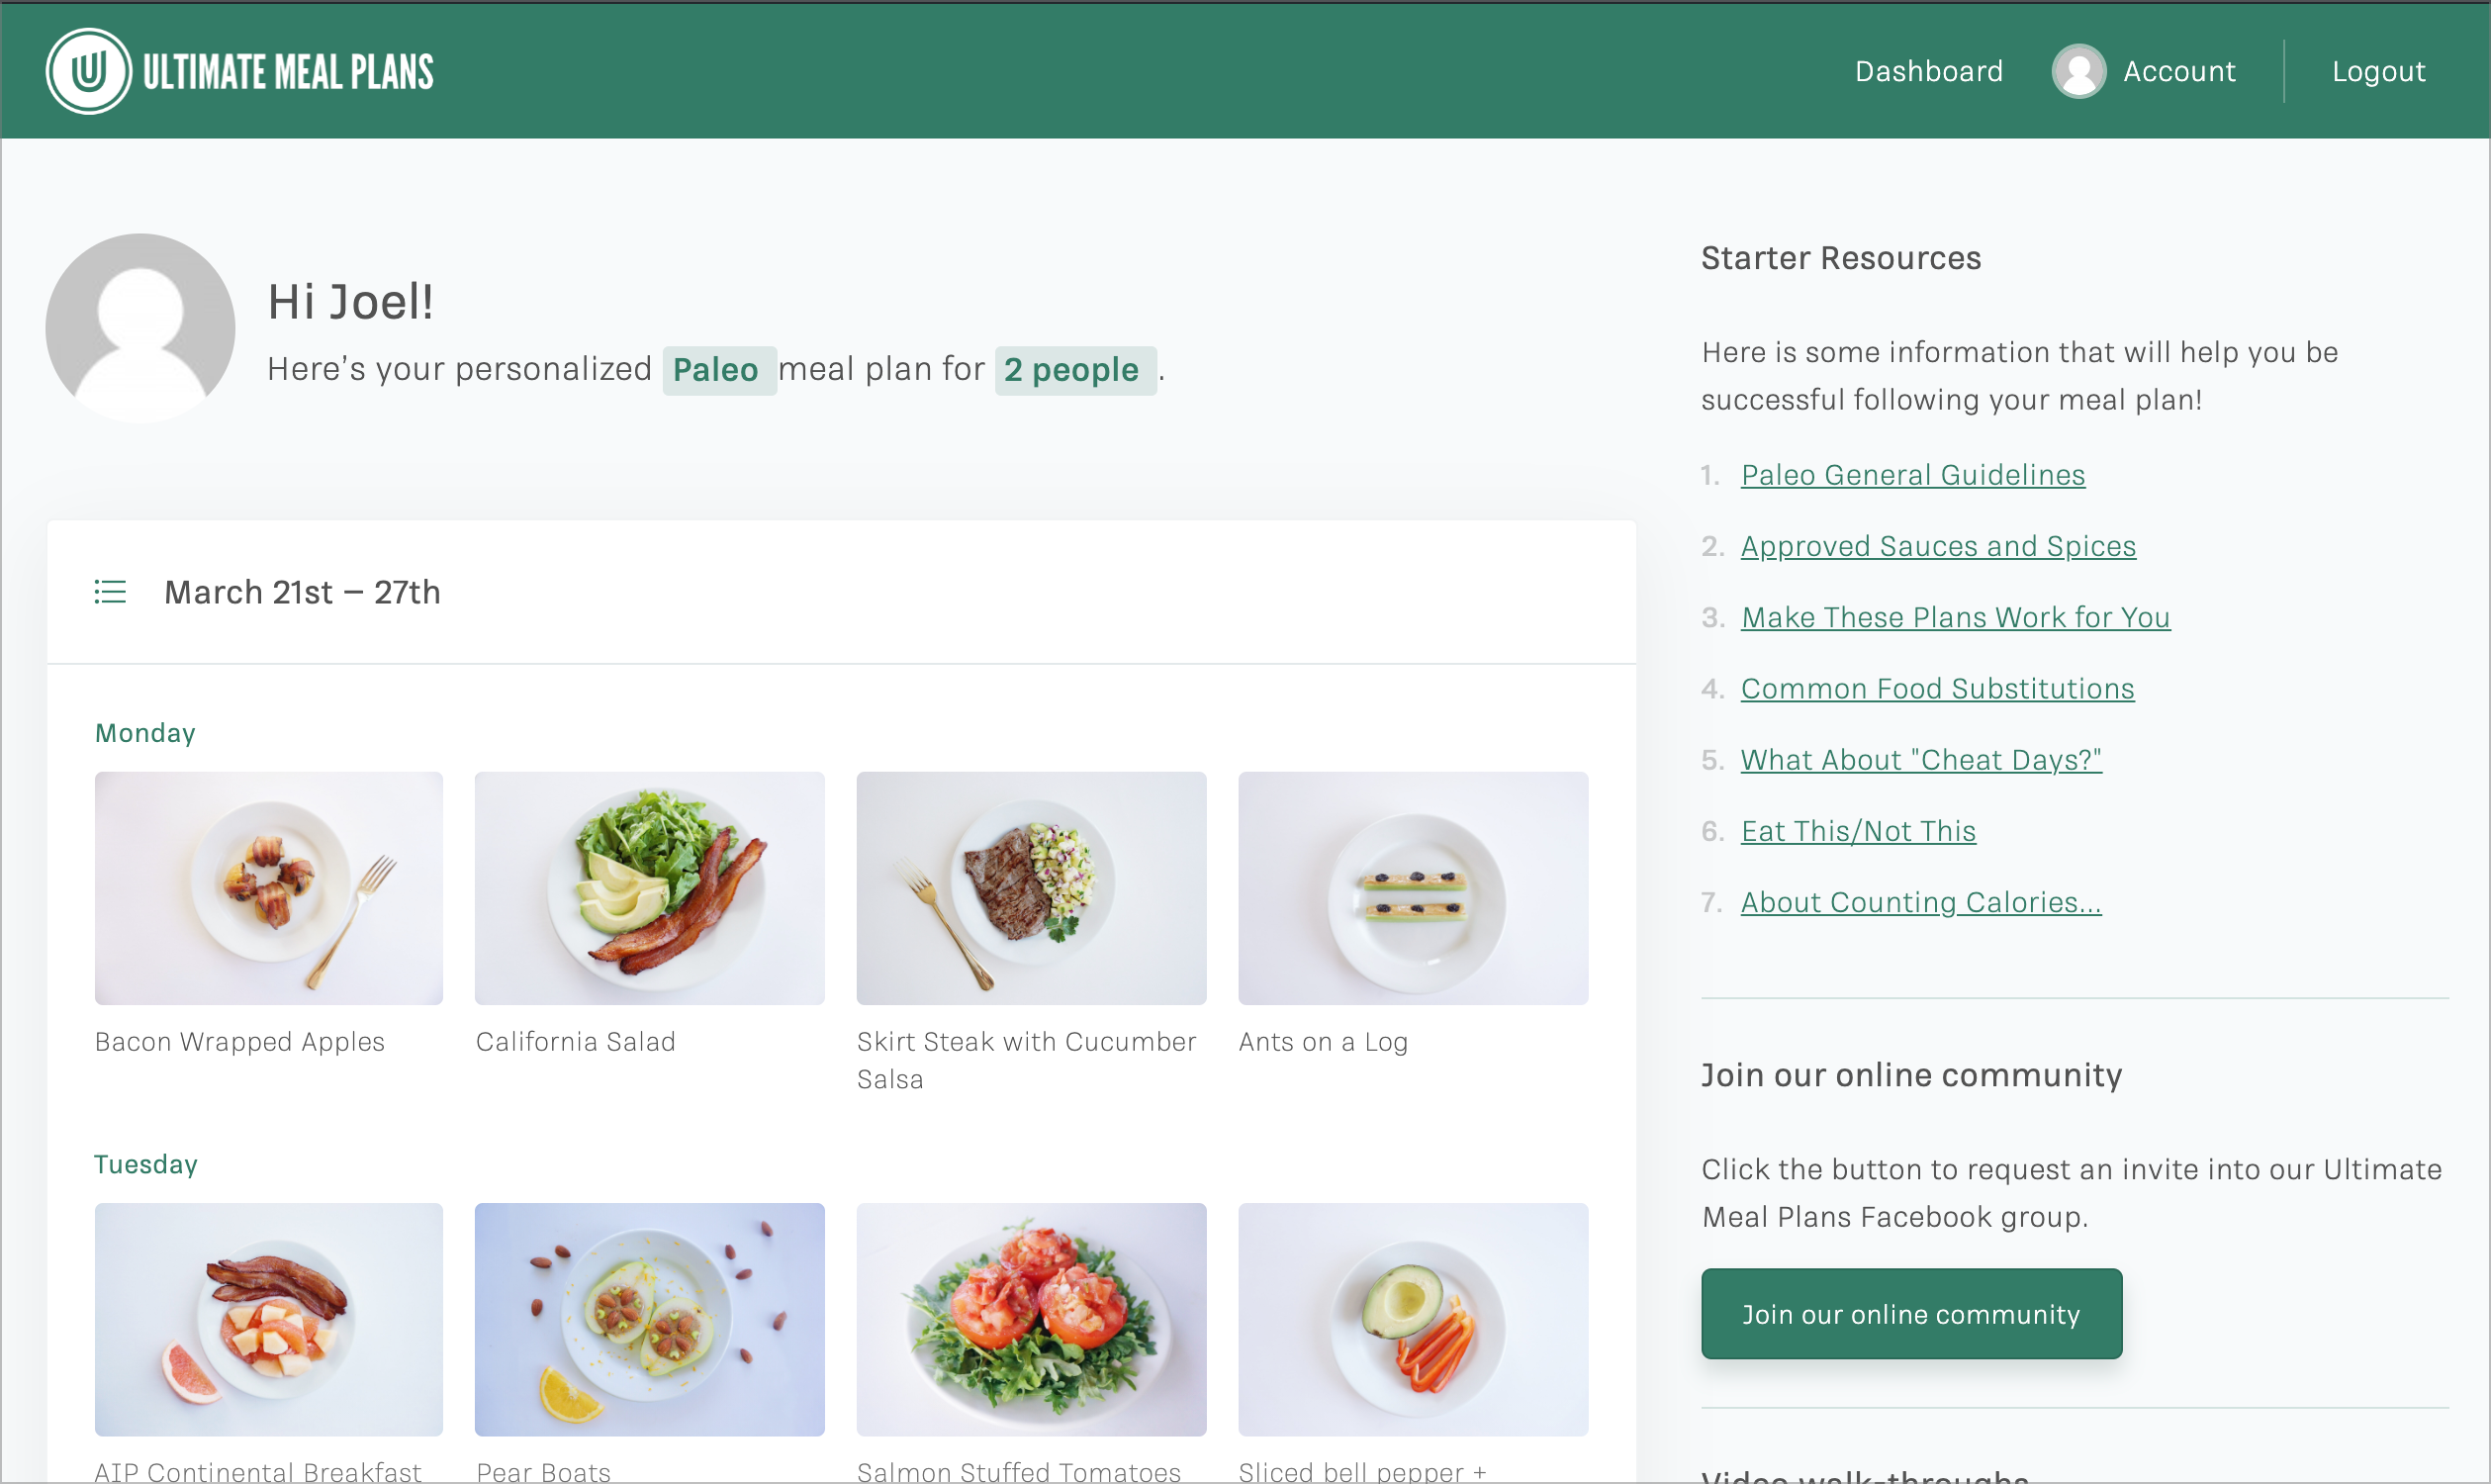 Find pricing, reviews and other details about Ultimate Meal Plans